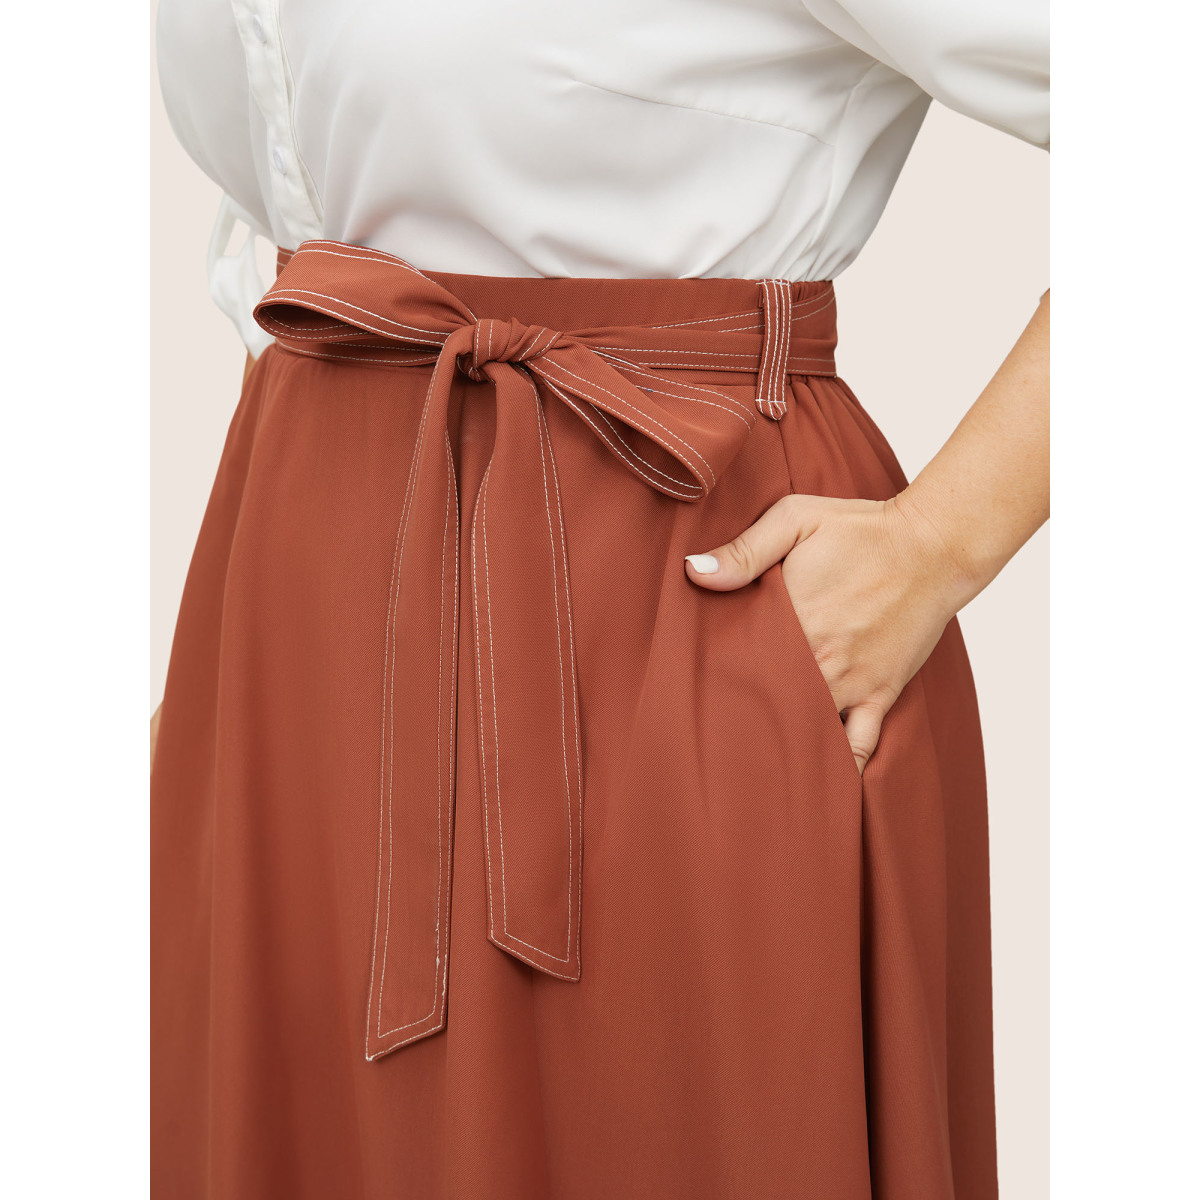 

Plus Size Contrast Trim Bowknot Belted Asymmetrical Hem Skirt Women Maroon At the Office Non No stretch Slanted pocket Belt Work Skirts BloomChic